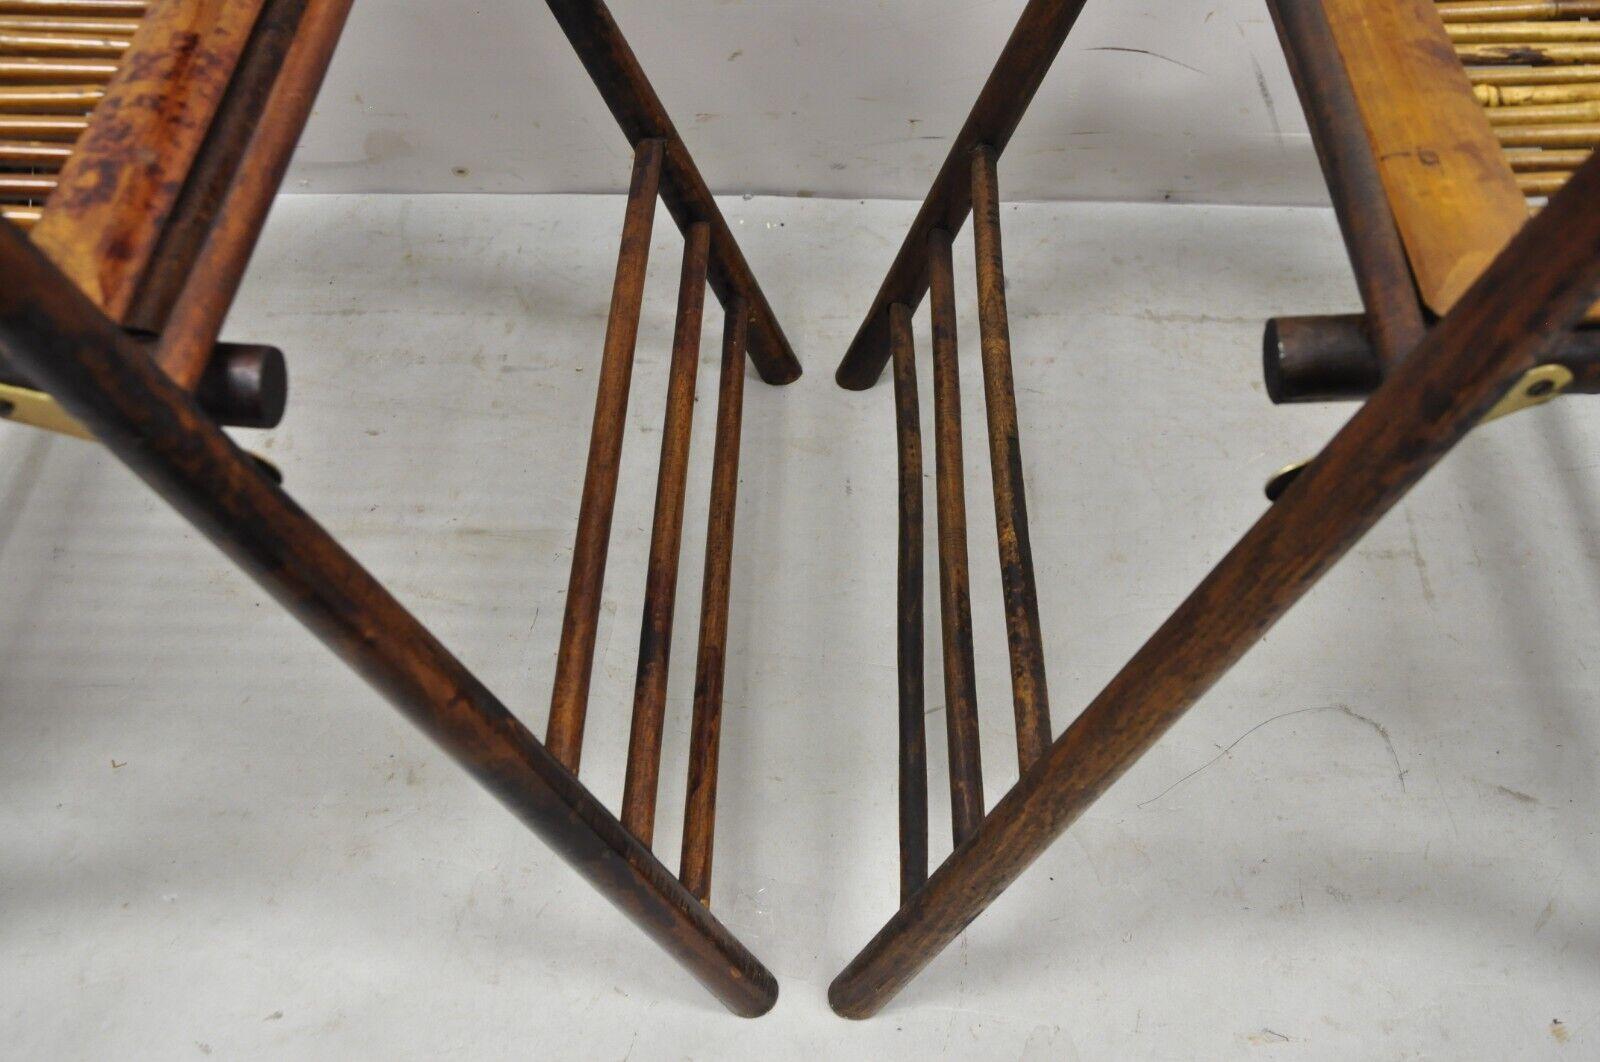 Bamboo Wooden Folding Chairs for Game Table or Events, Set of 4 3